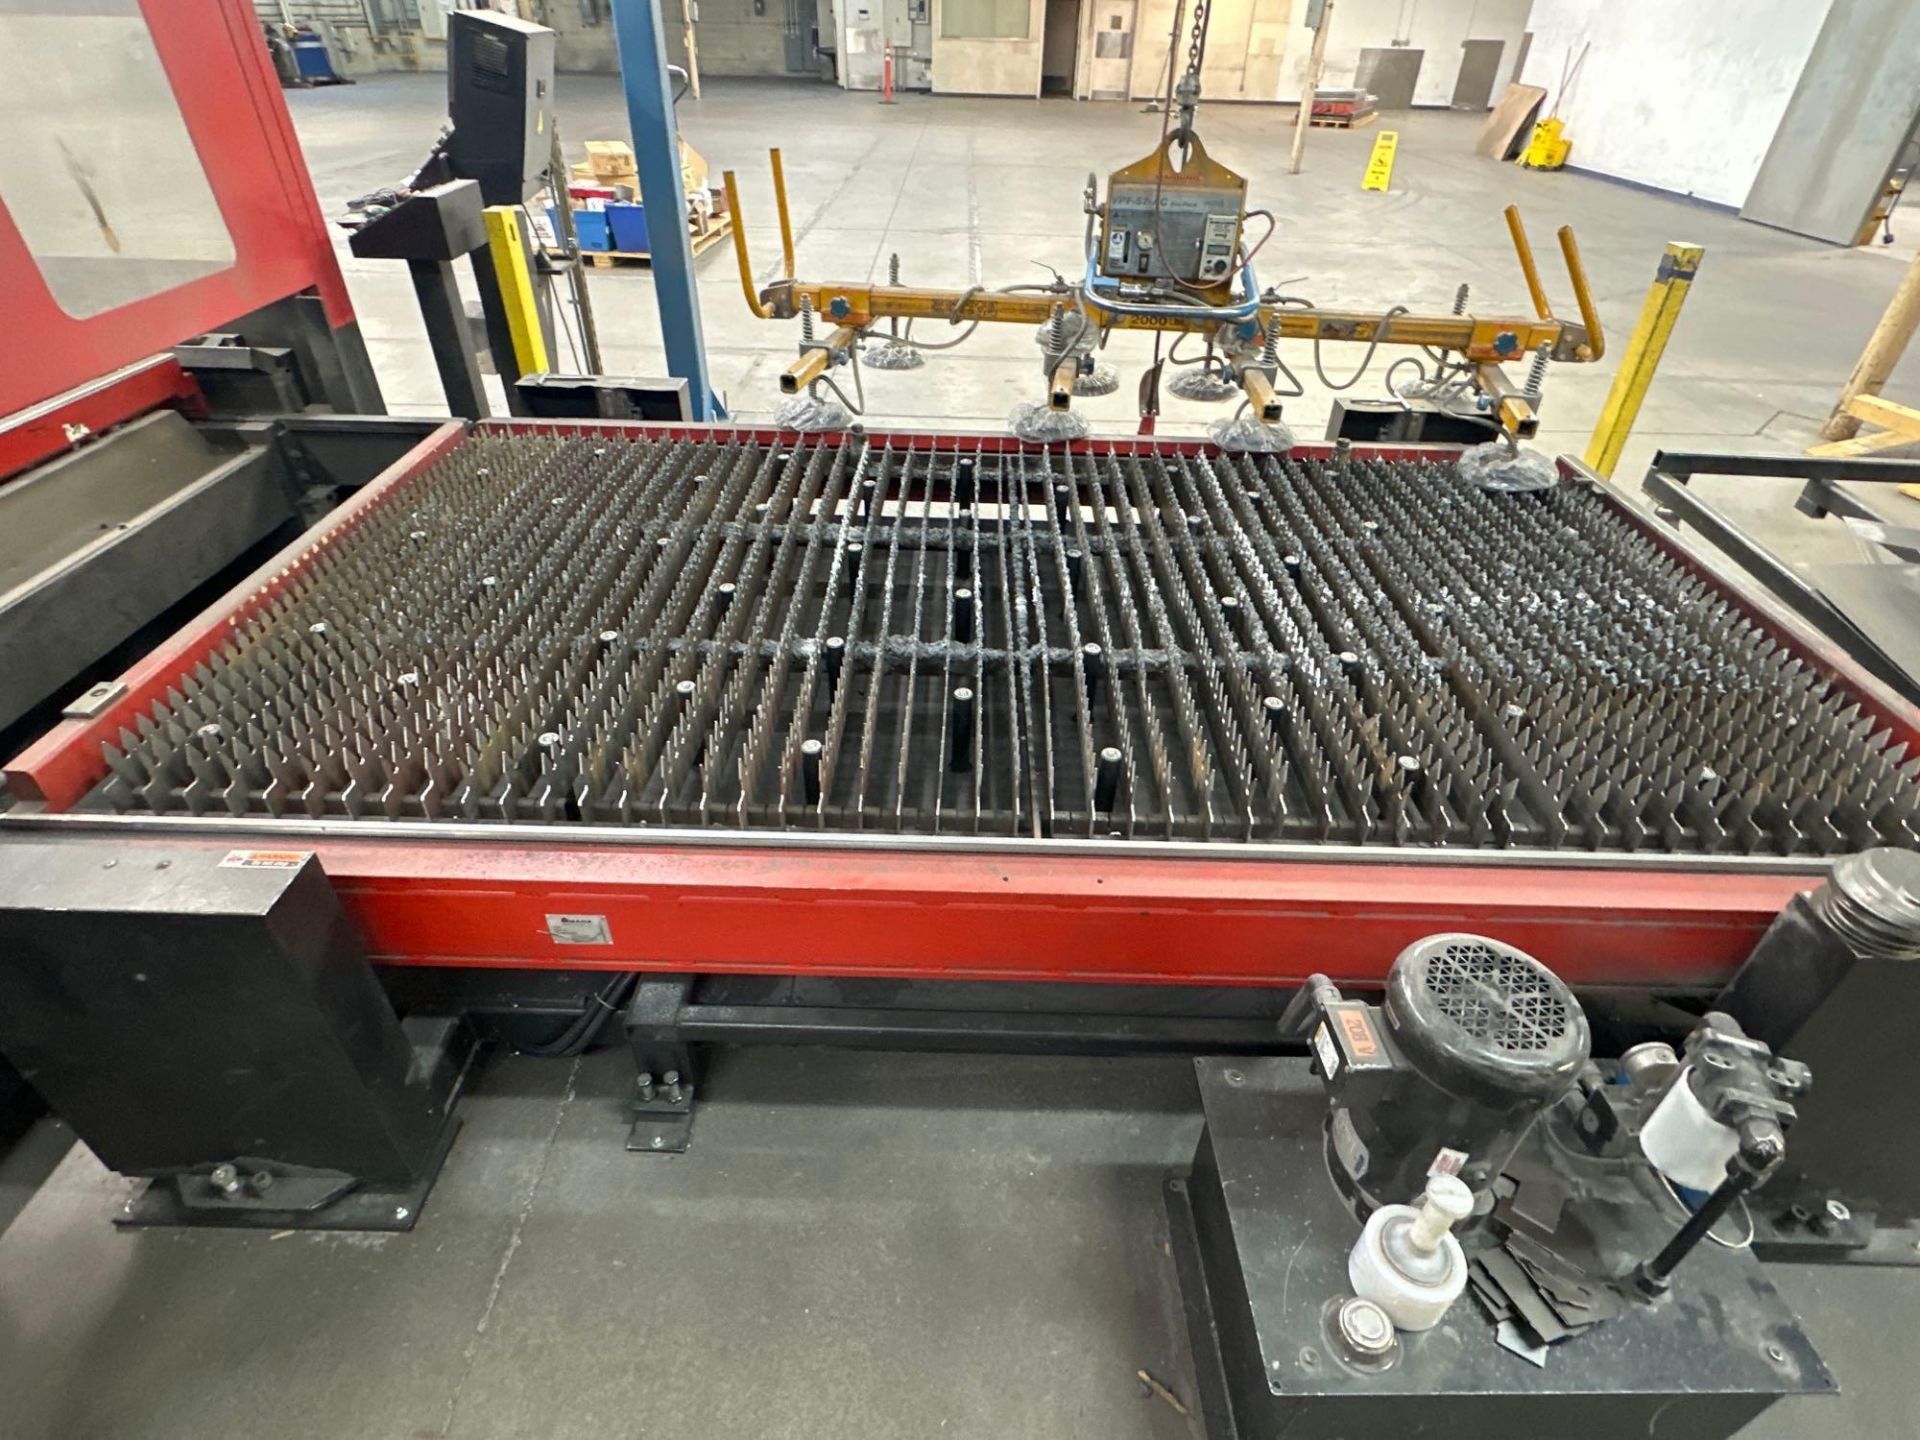 4000W AMADA FO-3015NT CO2 LASER, 2005 - 5' X 10' TABLE - INCLUDES DONALDSON TORIT DUST COLLECTOR - Image 19 of 23